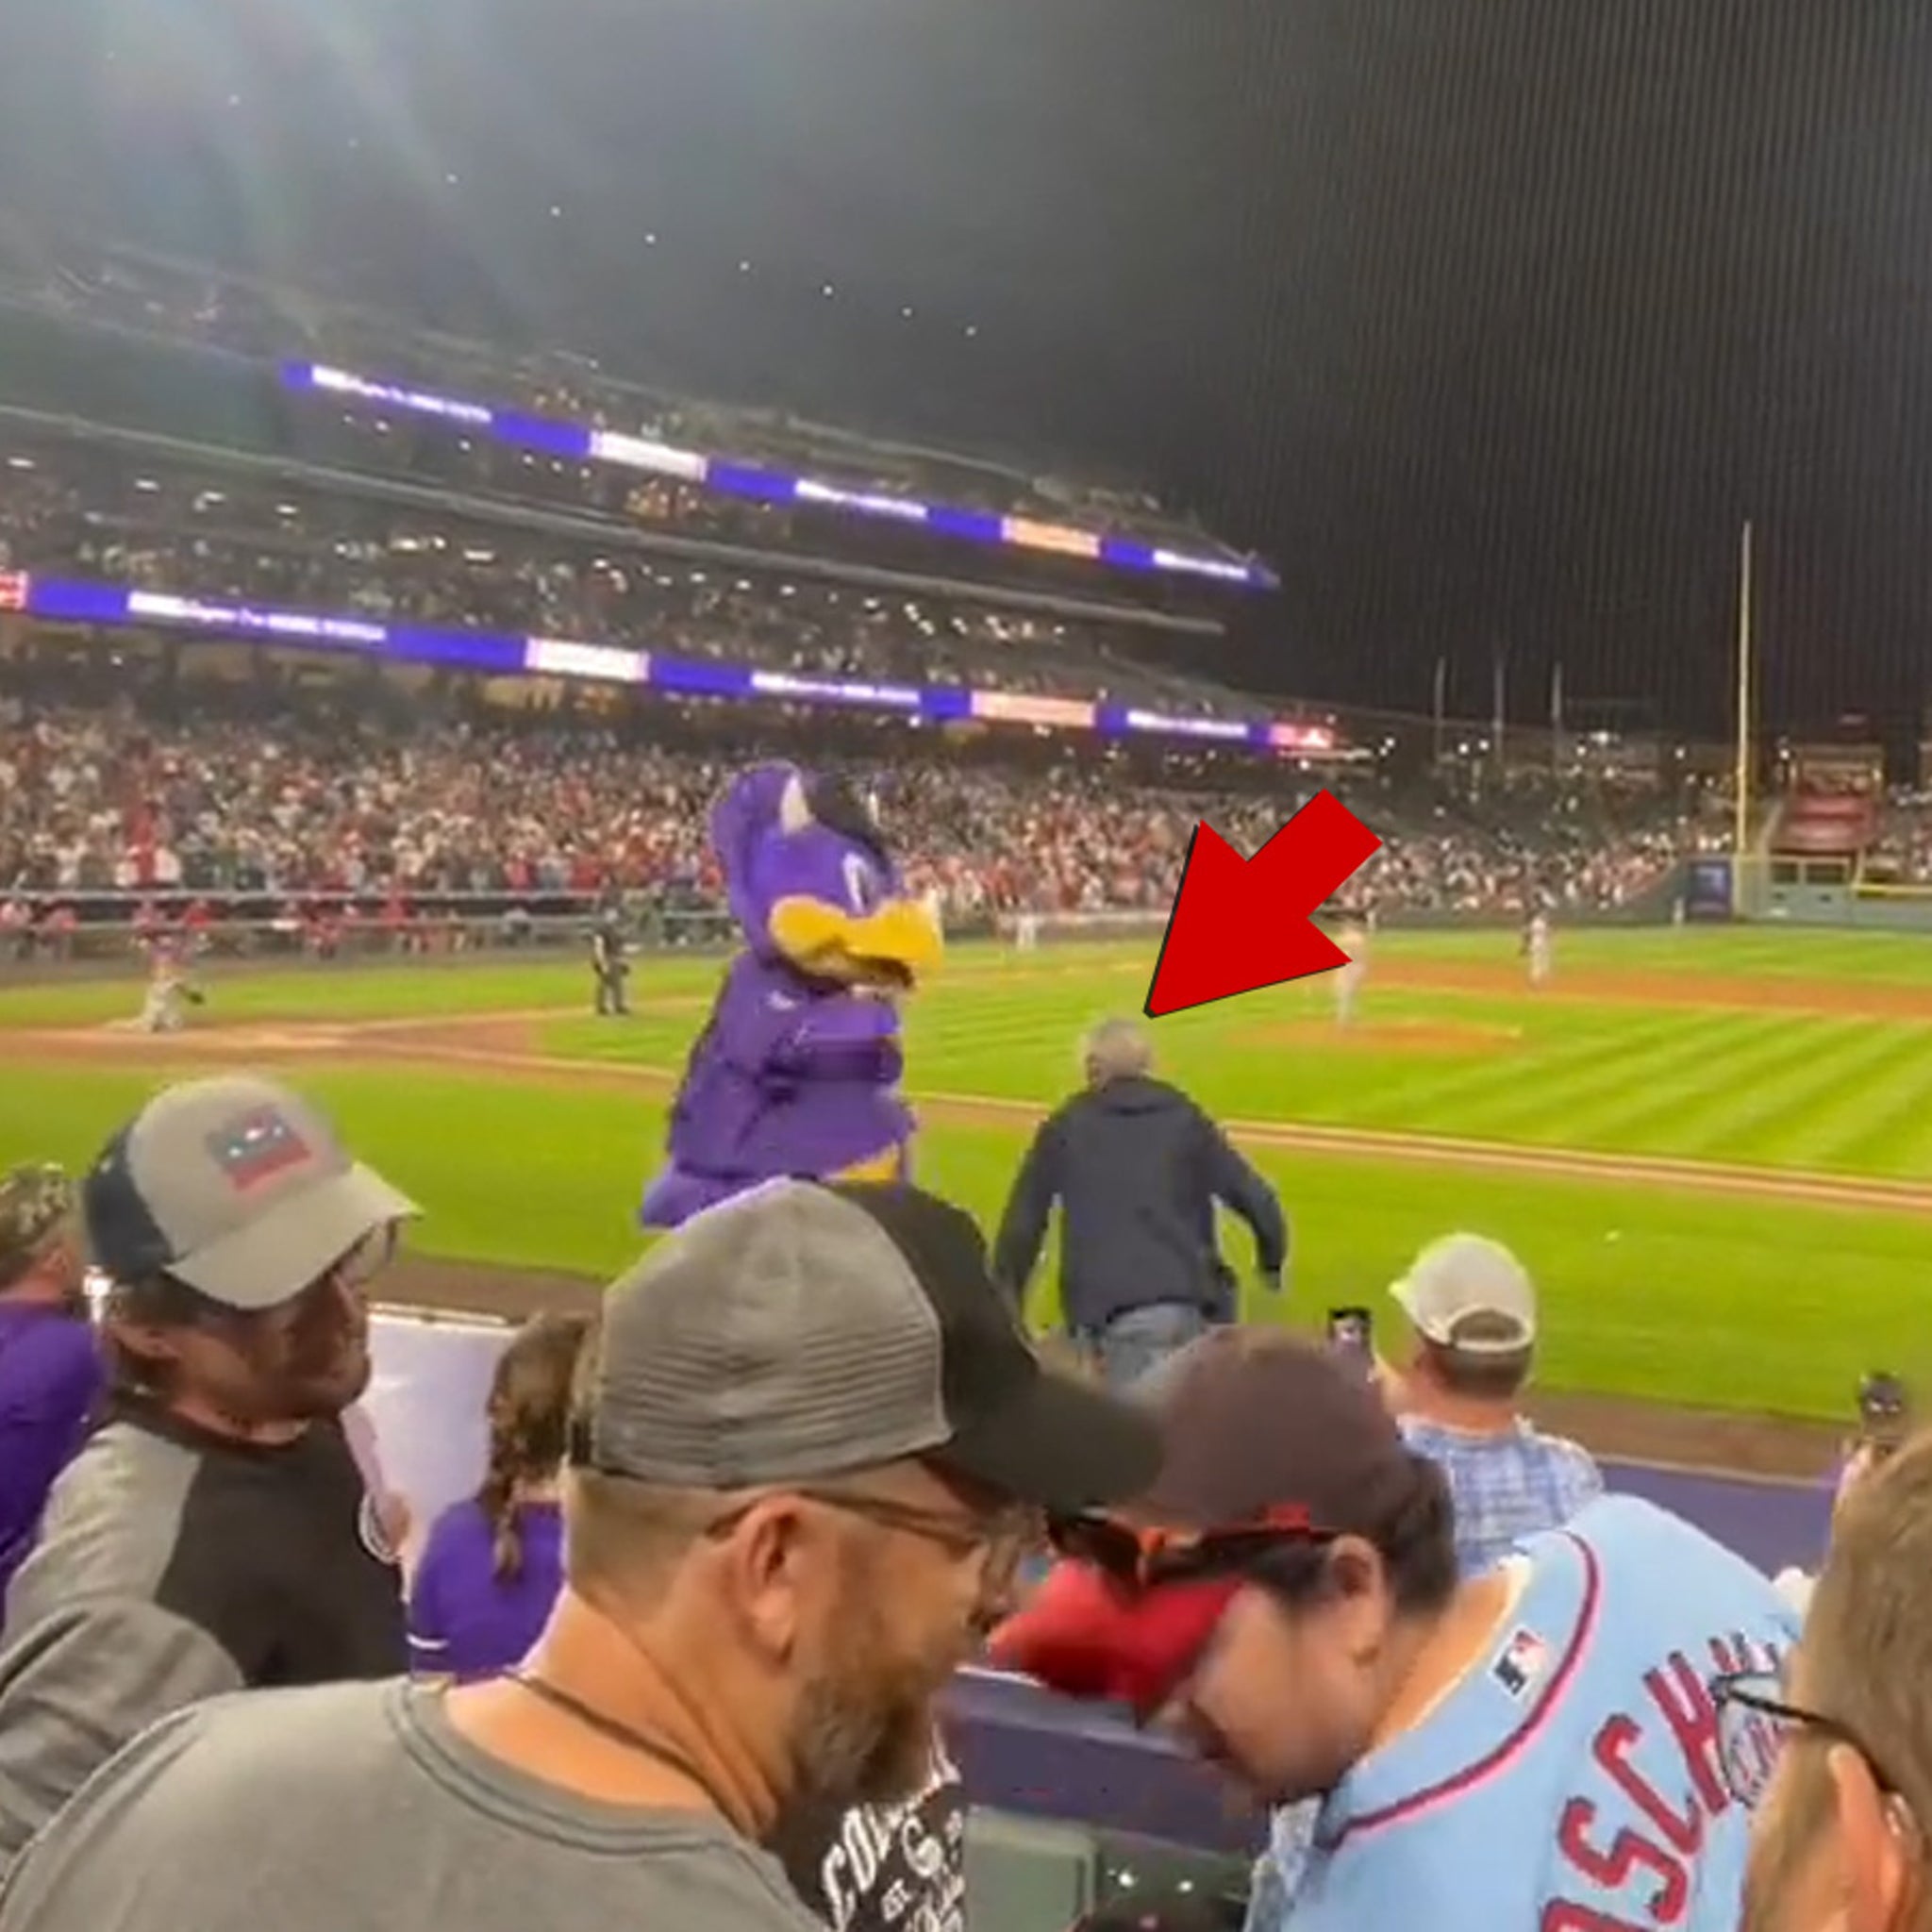 Police searching for man who brutally tackled mascot during Colorado Rockies  game